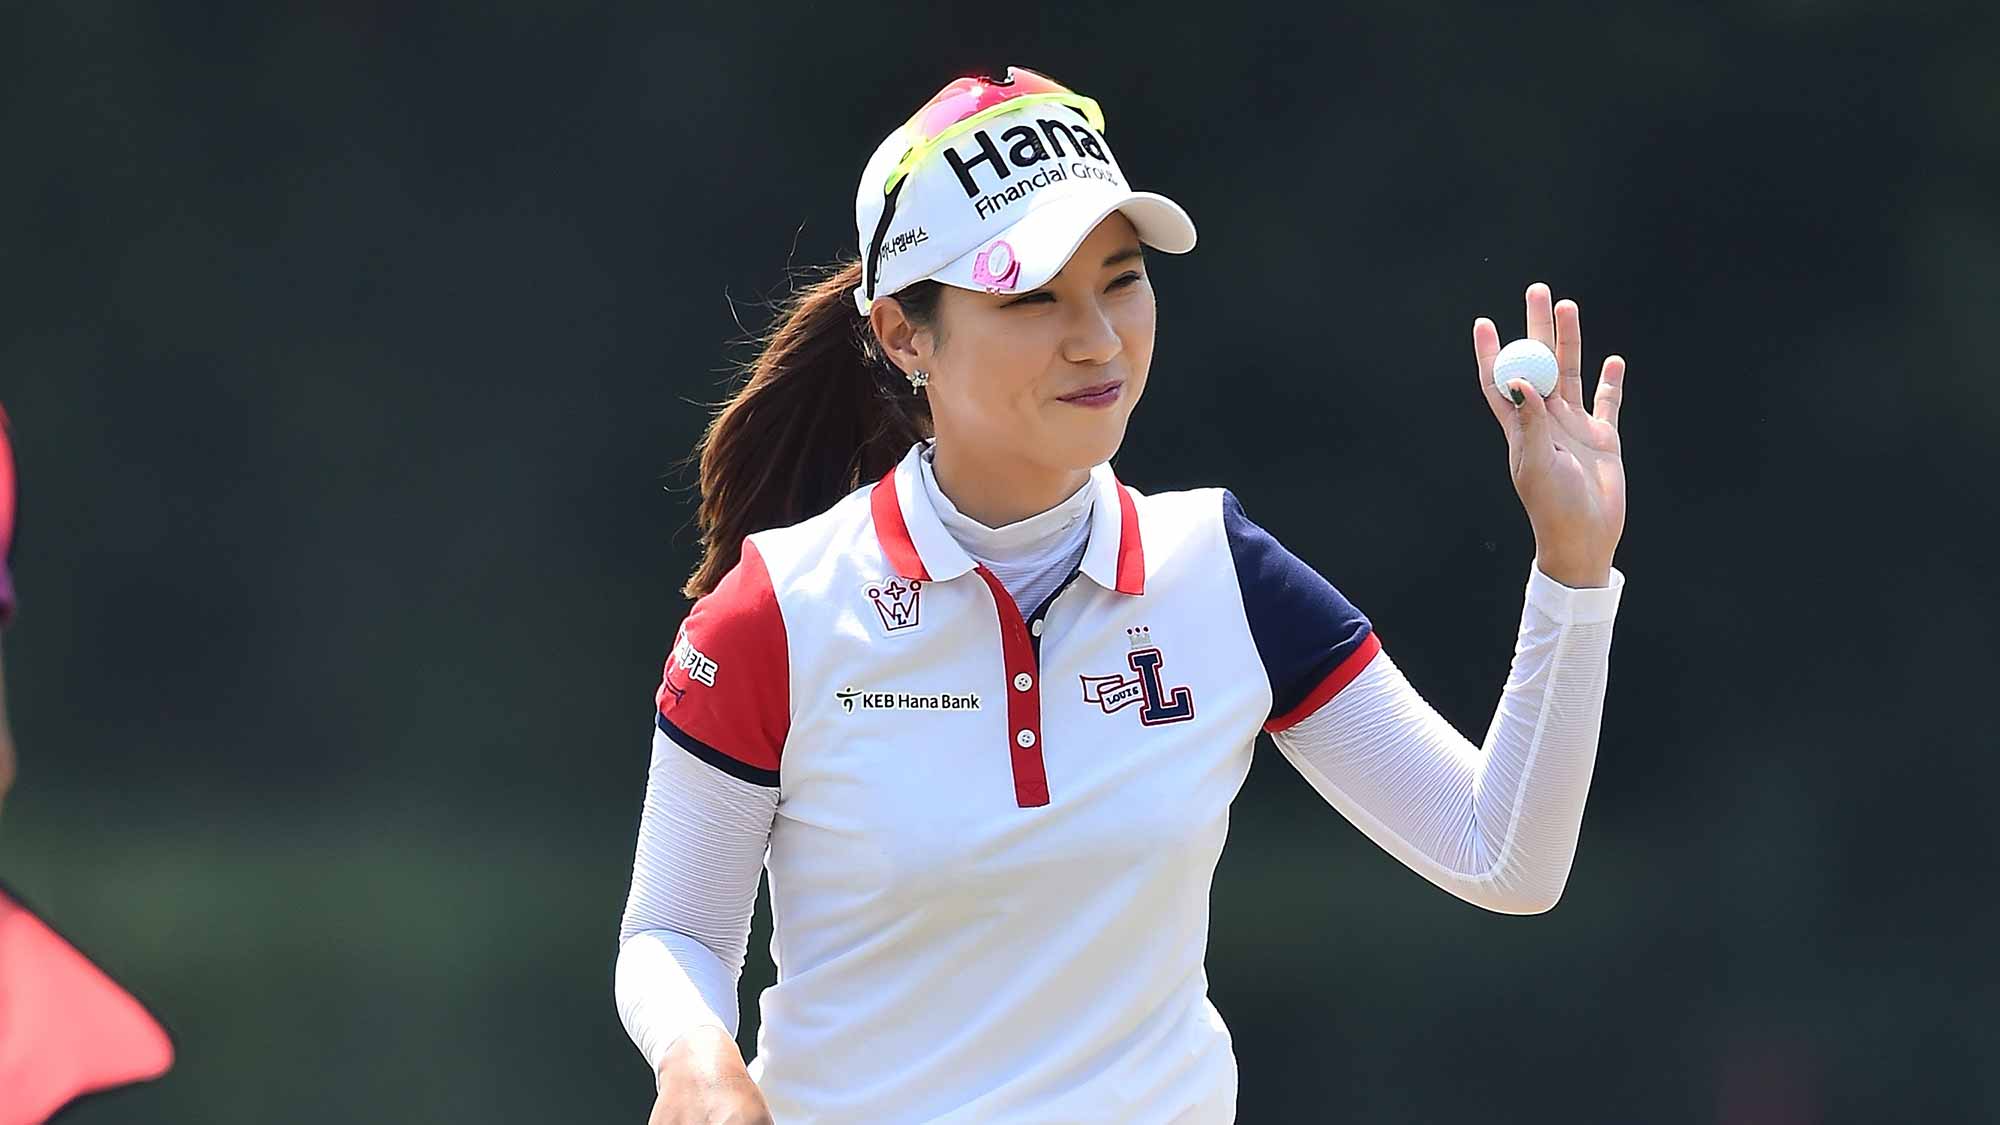 Hee Young Park of South Korea acknowledges the fan during day four of the 2016 Honda LPGA Thailand at Siam Country Club